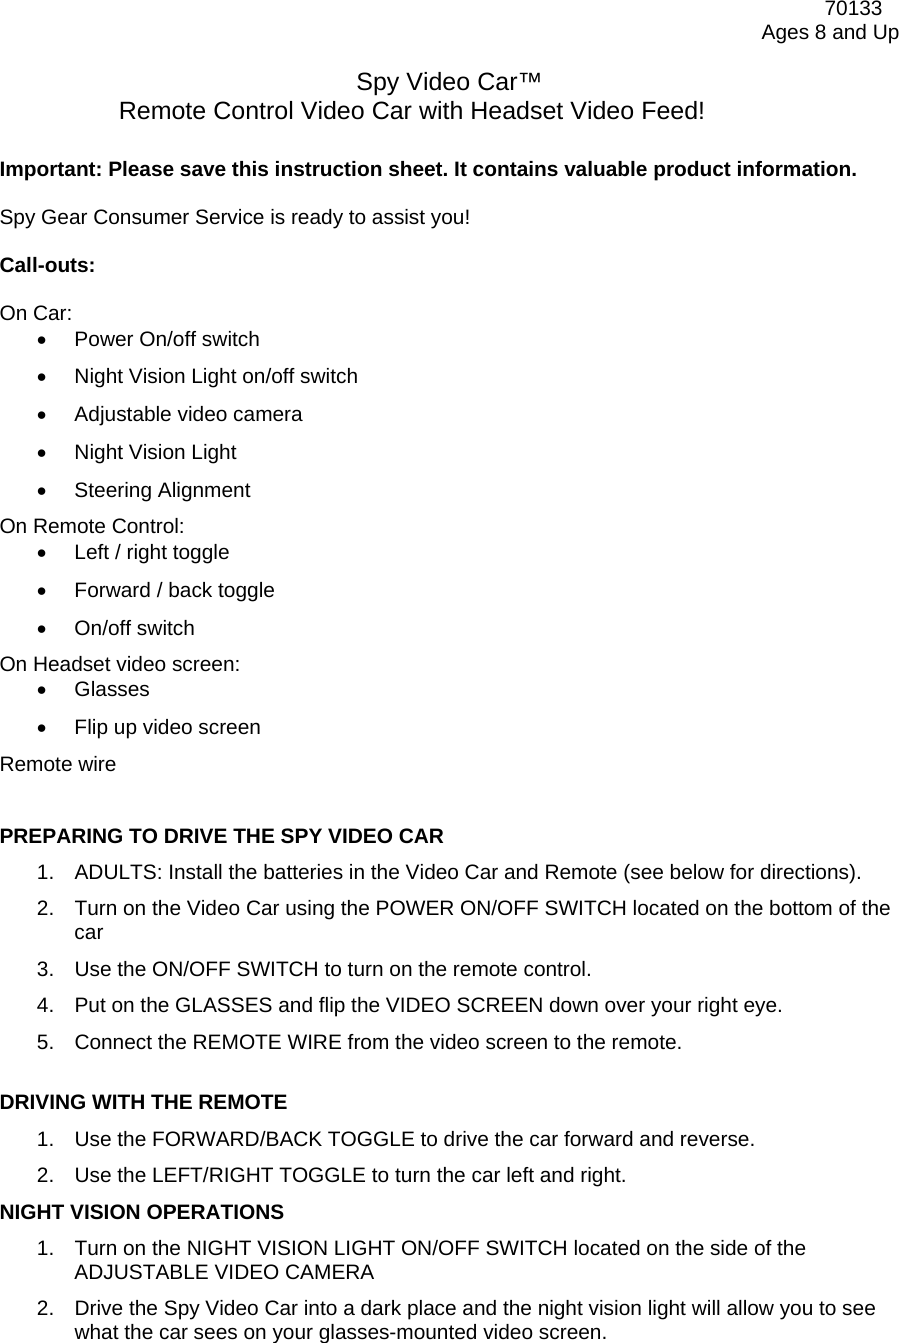              70133 Ages 8 and Up  Spy Video Car™ Remote Control Video Car with Headset Video Feed!  Important: Please save this instruction sheet. It contains valuable product information.  Spy Gear Consumer Service is ready to assist you!  Call-outs:  On Car: •  Power On/off switch •  Night Vision Light on/off switch •  Adjustable video camera •  Night Vision Light •  Steering Alignment On Remote Control: •  Left / right toggle •  Forward / back toggle •  On/off switch On Headset video screen: •  Glasses •  Flip up video screen Remote wire   PREPARING TO DRIVE THE SPY VIDEO CAR  1.  ADULTS: Install the batteries in the Video Car and Remote (see below for directions). 2.  Turn on the Video Car using the POWER ON/OFF SWITCH located on the bottom of the car  3.  Use the ON/OFF SWITCH to turn on the remote control.  4.  Put on the GLASSES and flip the VIDEO SCREEN down over your right eye. 5.  Connect the REMOTE WIRE from the video screen to the remote.  DRIVING WITH THE REMOTE 1.  Use the FORWARD/BACK TOGGLE to drive the car forward and reverse.  2.  Use the LEFT/RIGHT TOGGLE to turn the car left and right.  NIGHT VISION OPERATIONS 1.  Turn on the NIGHT VISION LIGHT ON/OFF SWITCH located on the side of the ADJUSTABLE VIDEO CAMERA  2.  Drive the Spy Video Car into a dark place and the night vision light will allow you to see what the car sees on your glasses-mounted video screen. 